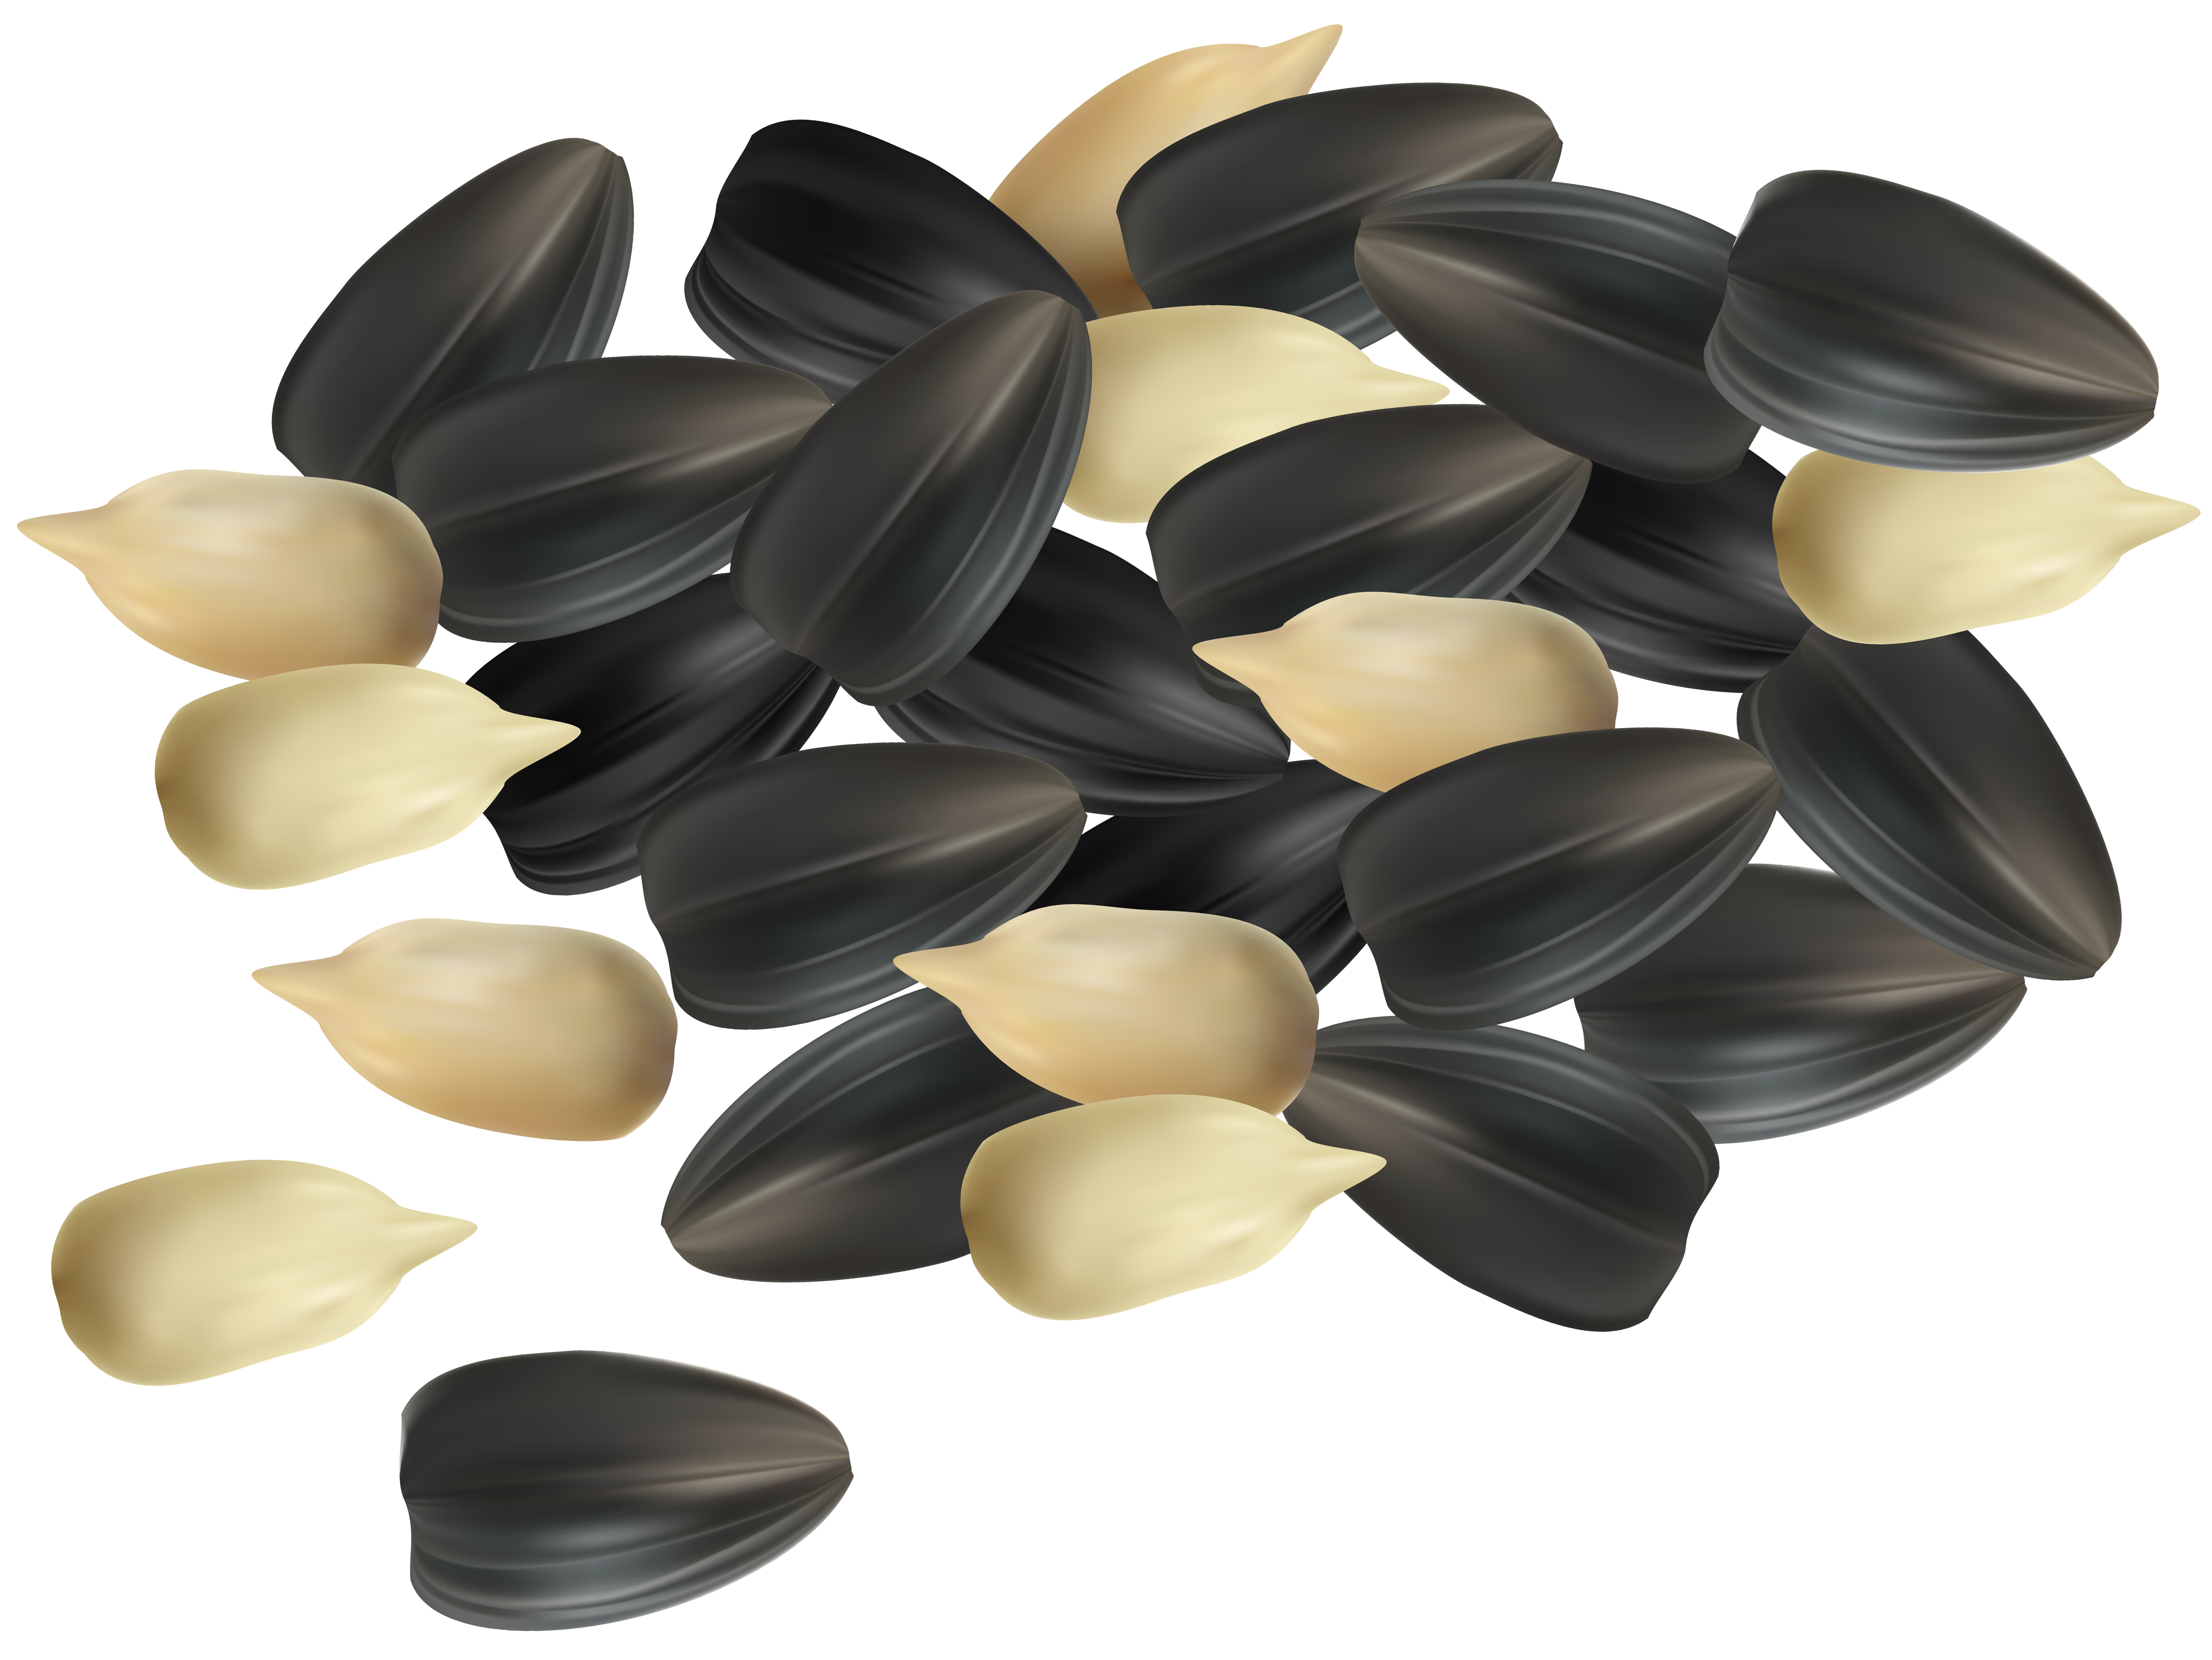 nuts clipart different seed